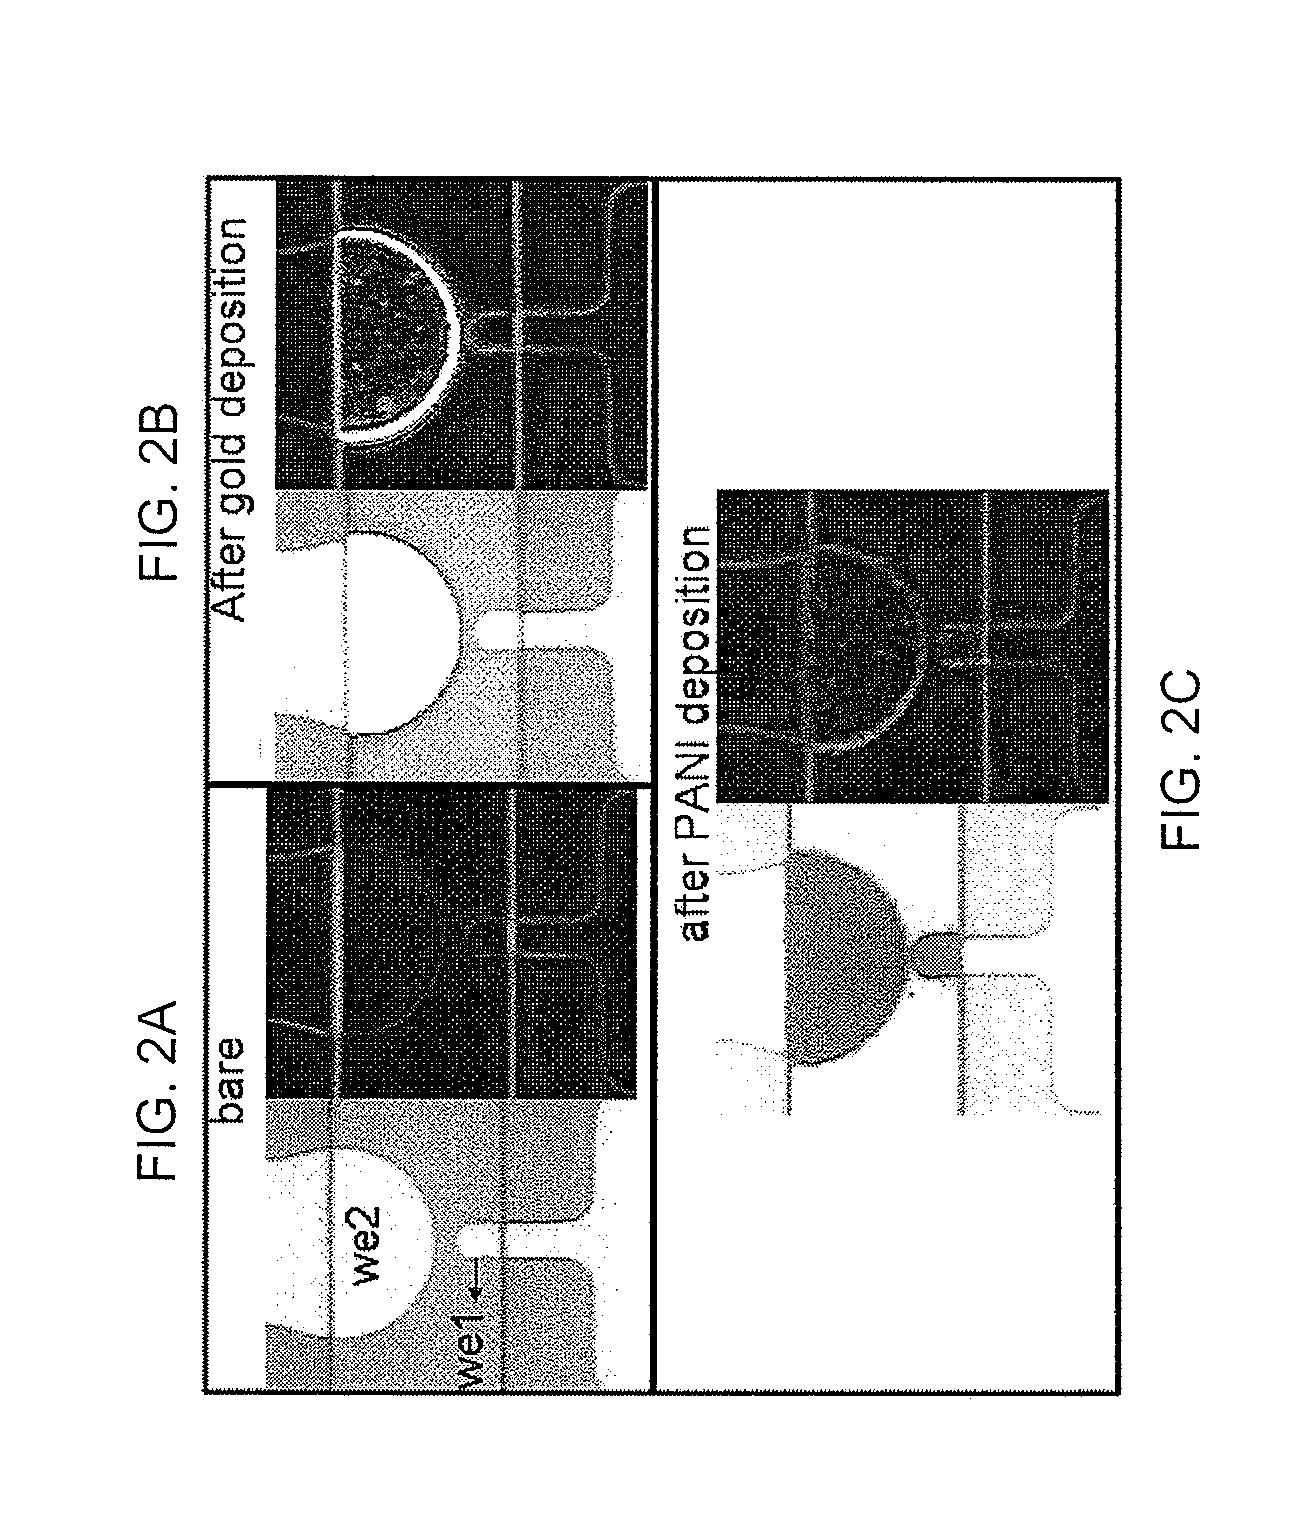 Systems and Methods for Integrated Electrochemical and Electrical Detection